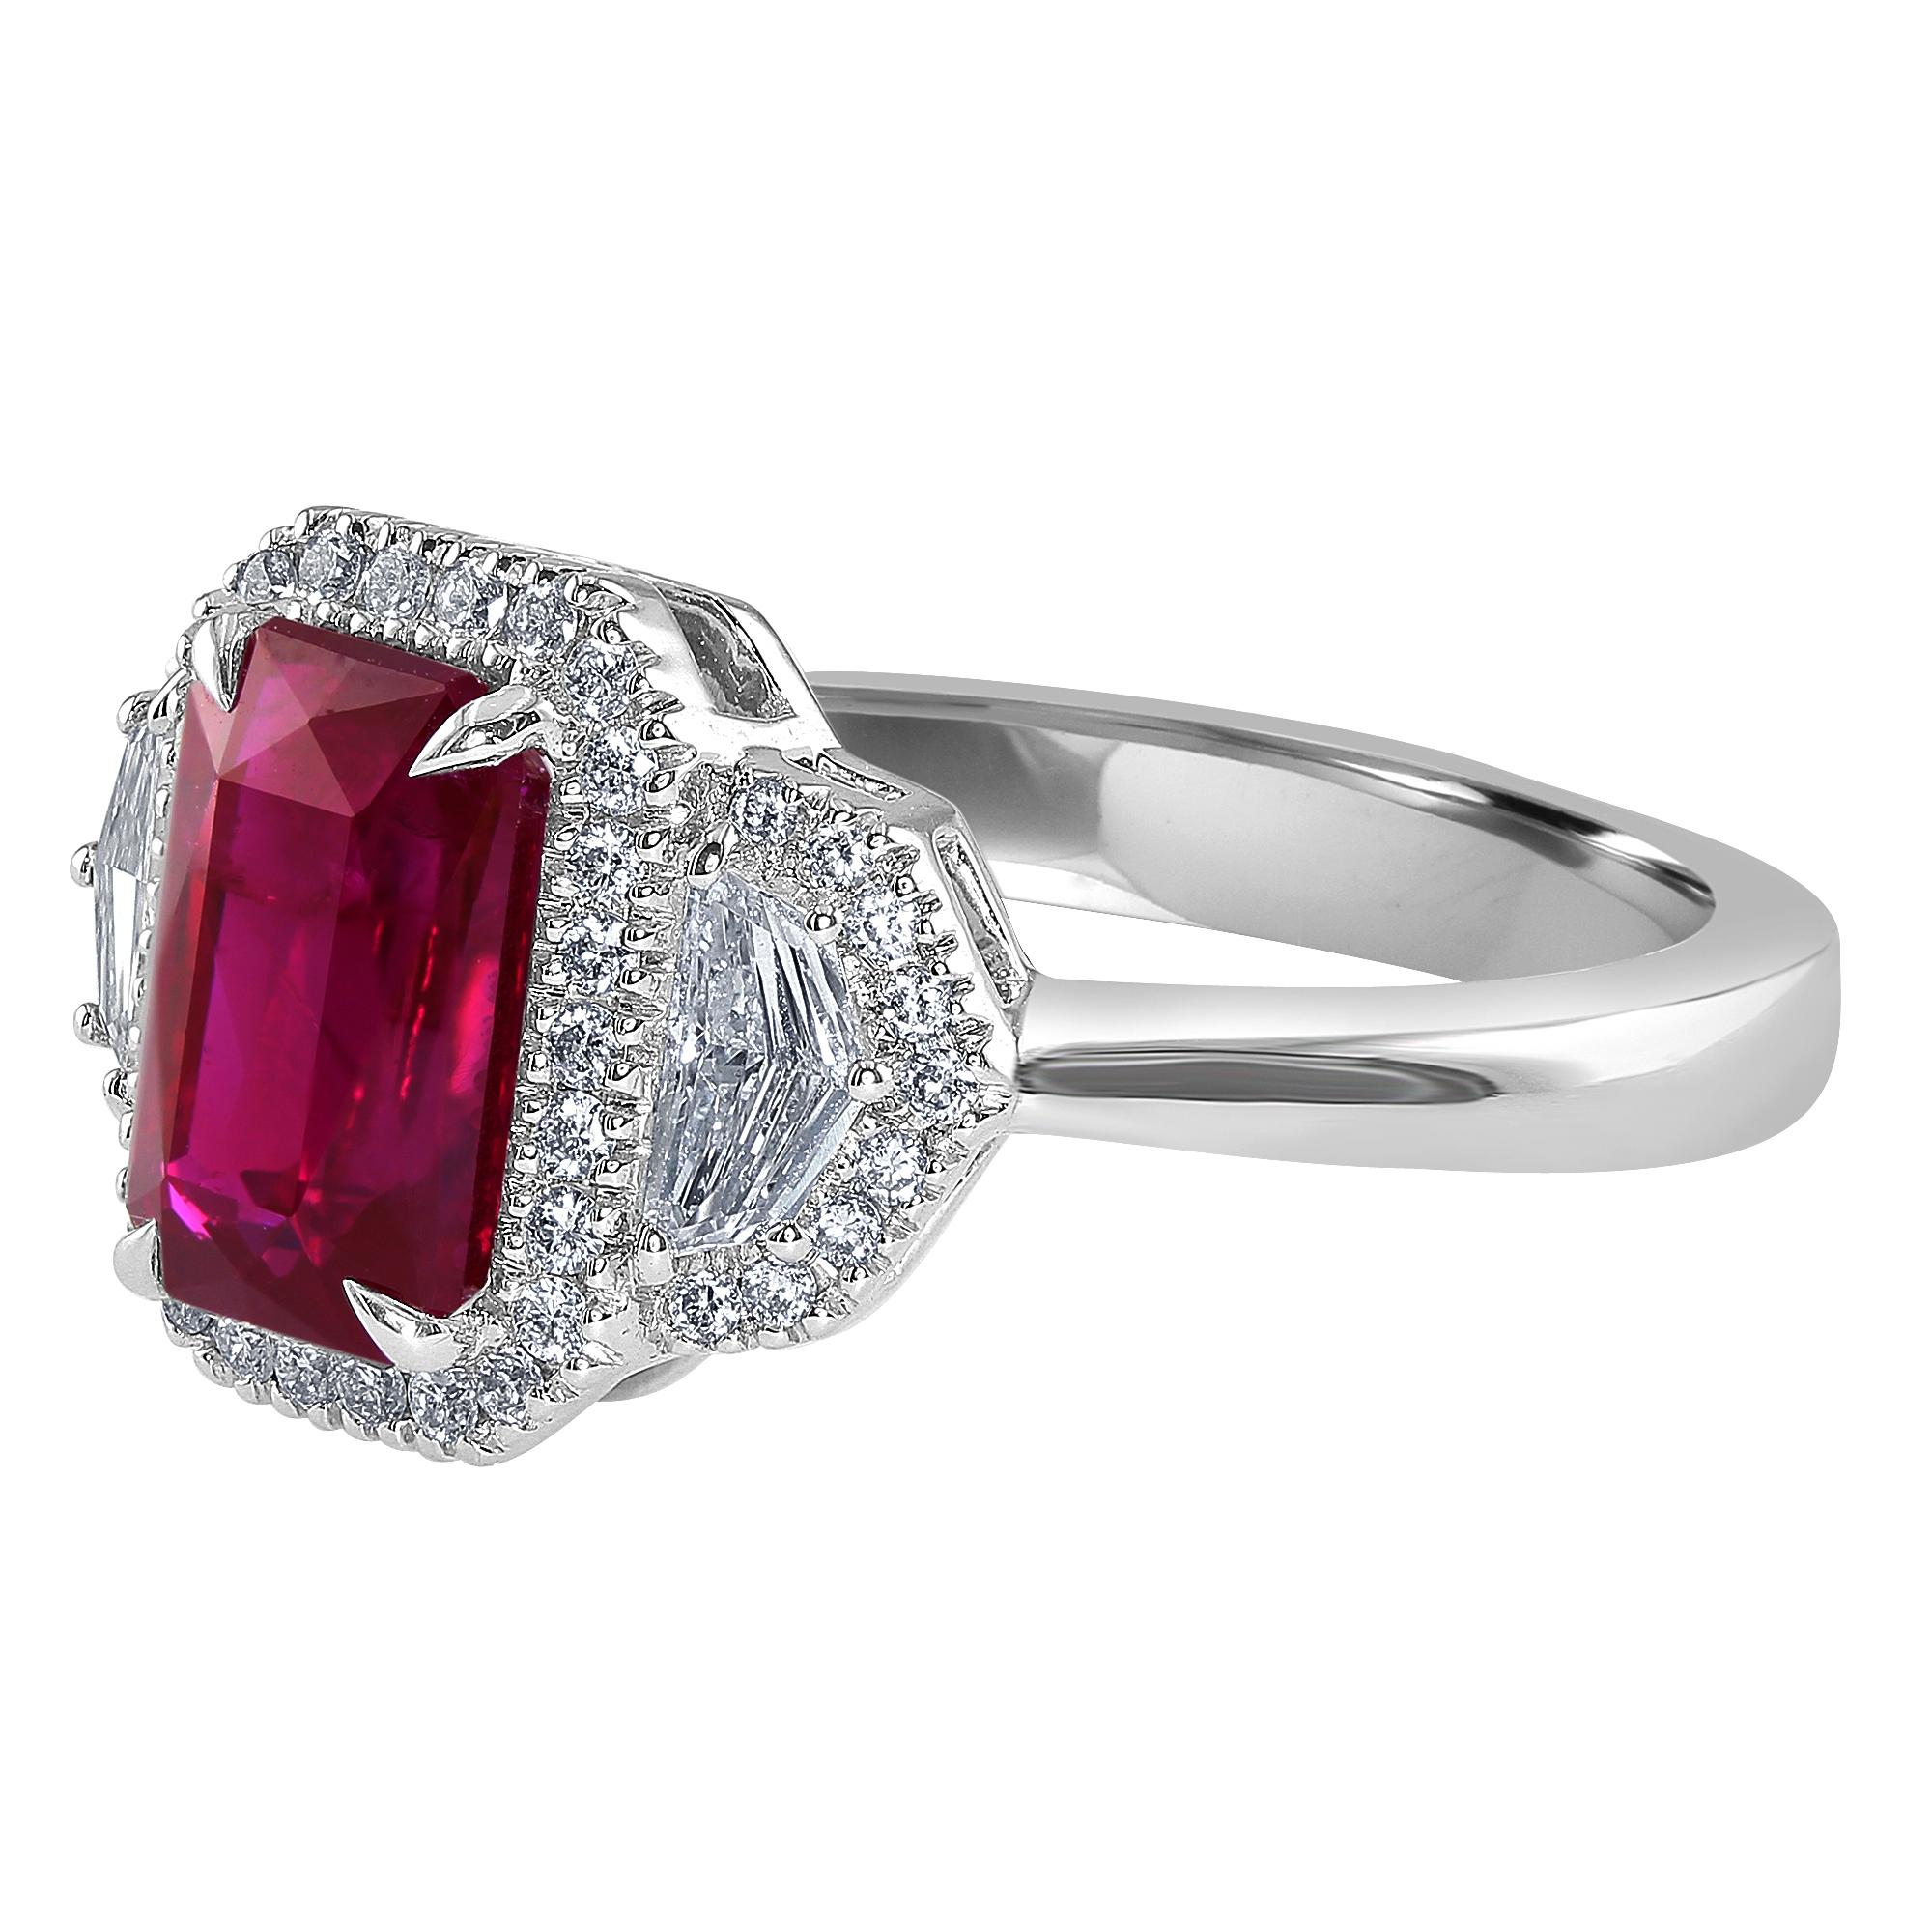 This ring features a 2.34 carat Emerald cut Ruby, set between two epaulet diamonds, 0.26 carat, total weight.

The ruby and epaulet diamonds are surrounded by a halo of round diamonds, 0.20 carat, total weight.

Absolutely stunning and vibrant red